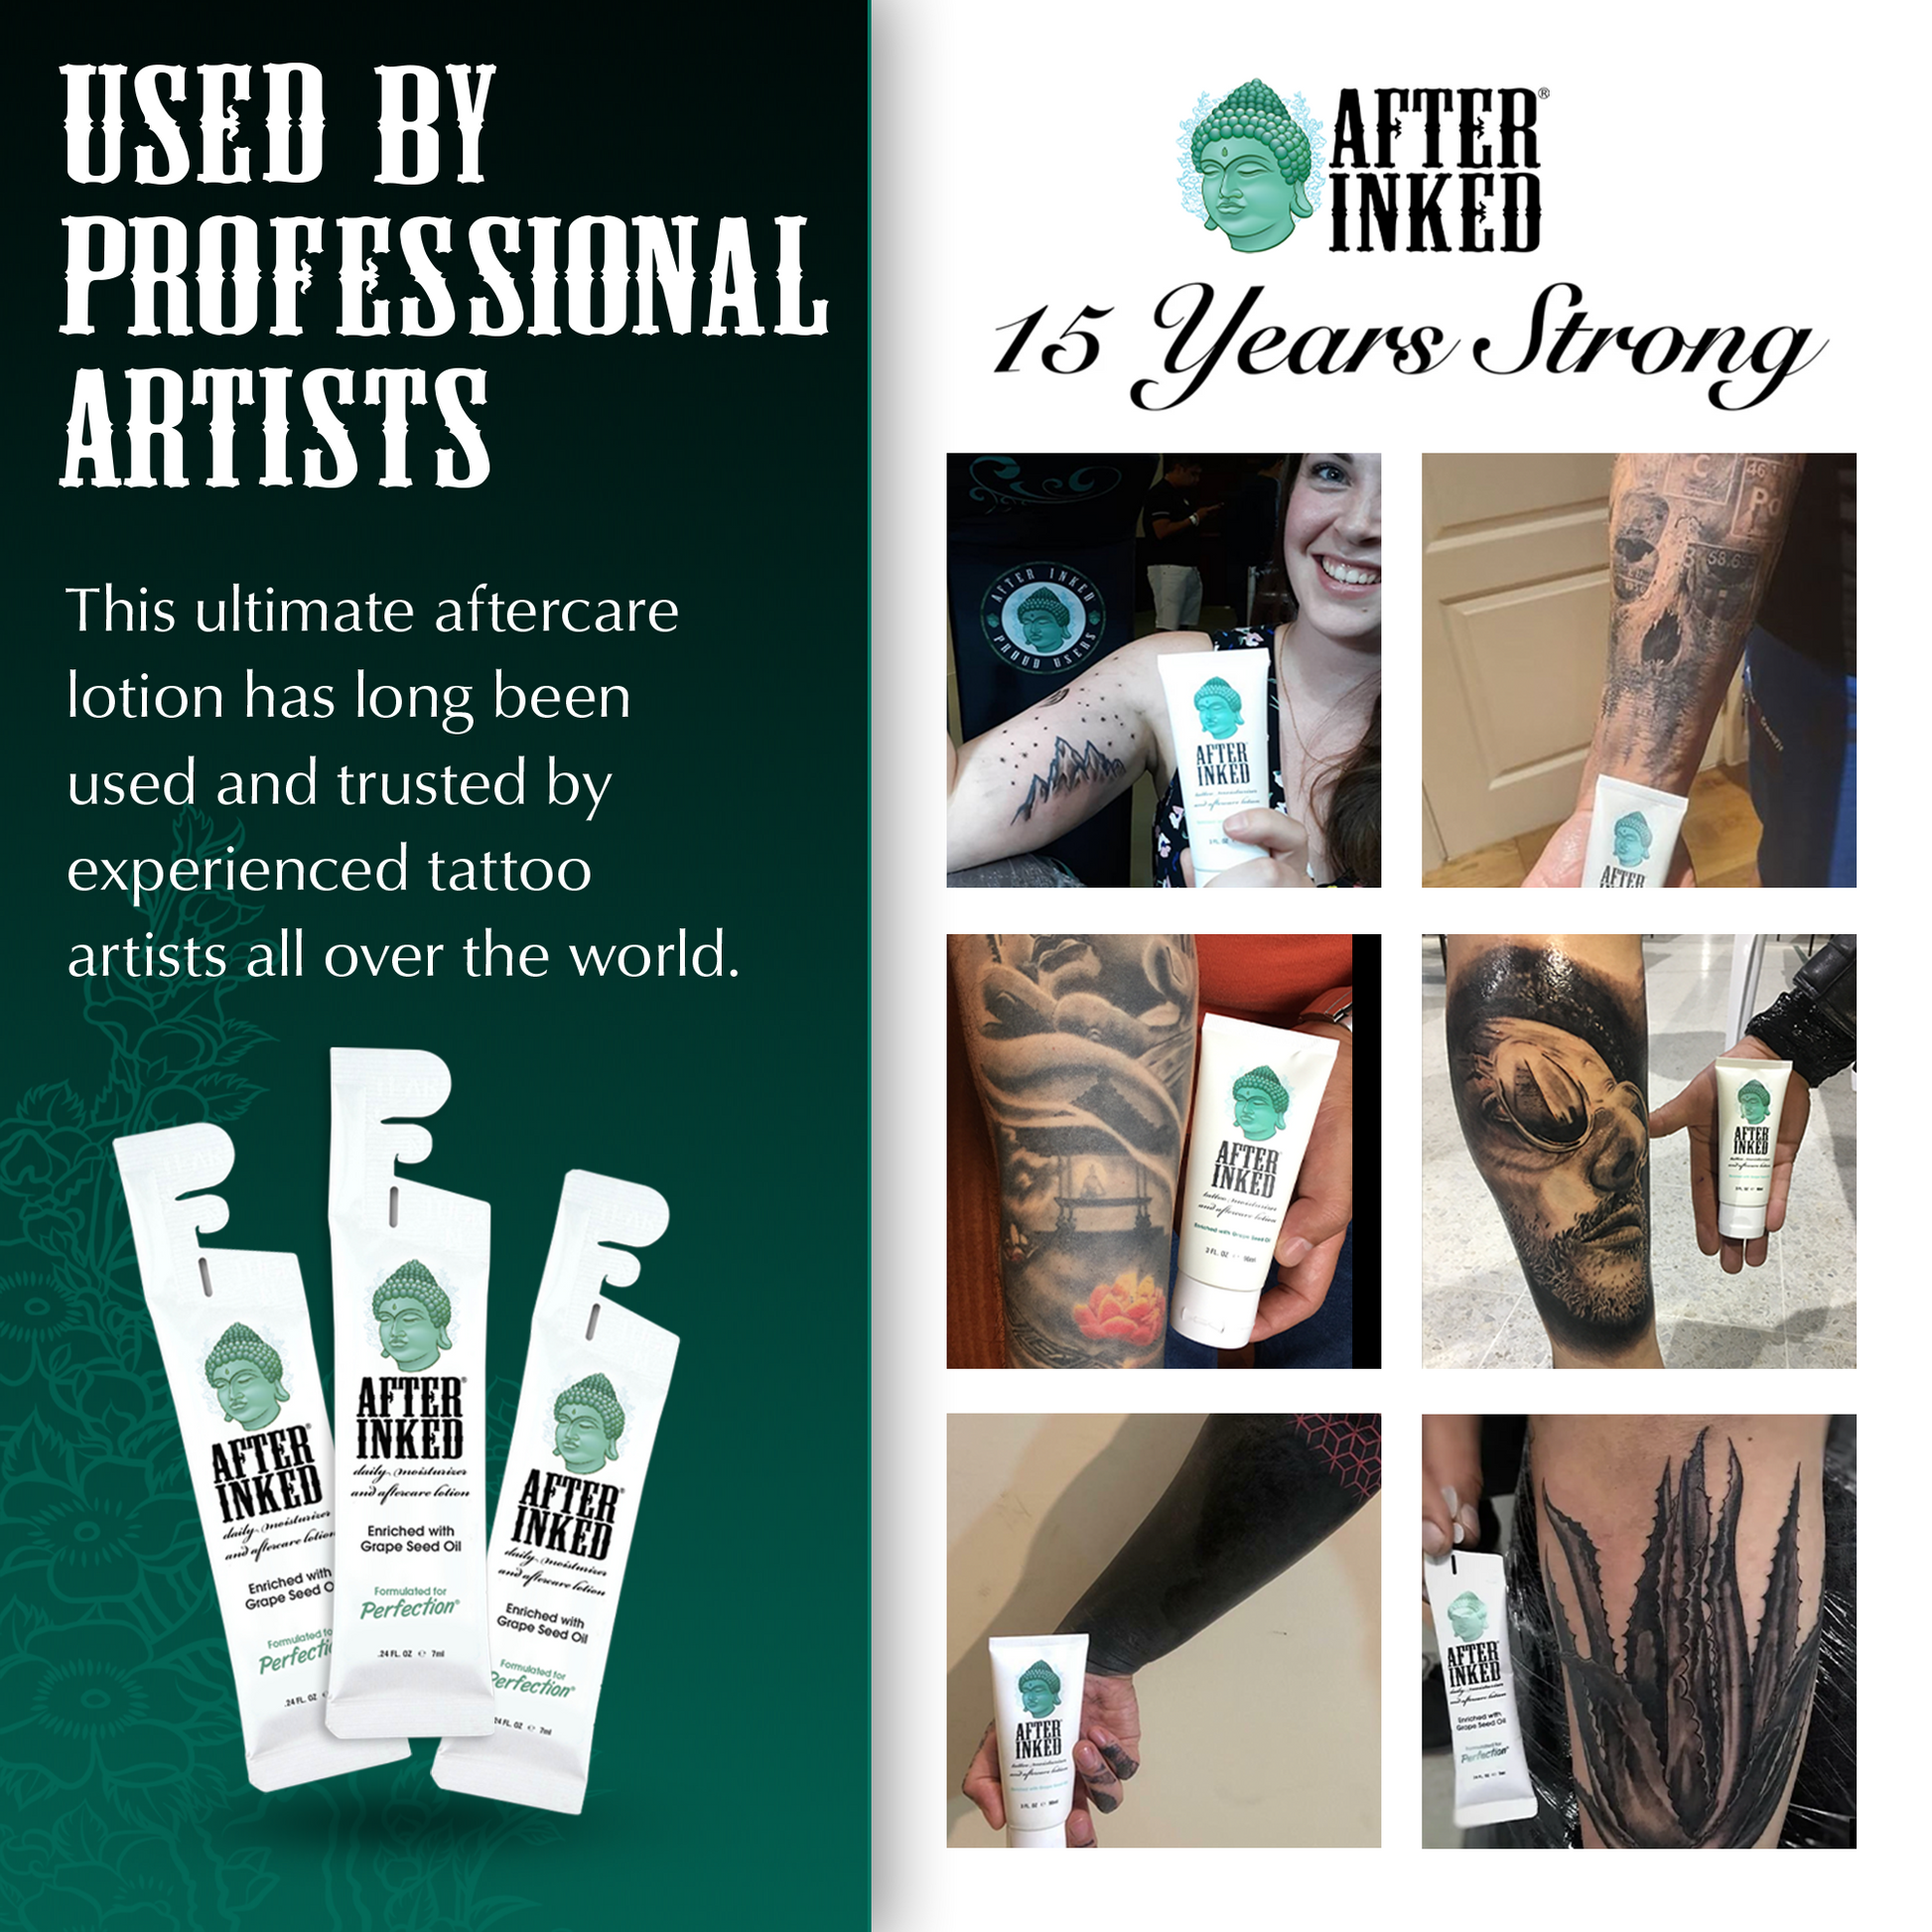 Tattoo aftercare. Used by professional tattoo artists. This ultimate tattoo aftercare lotion has long been used and trusted by experienced tattoo artists all over the world.